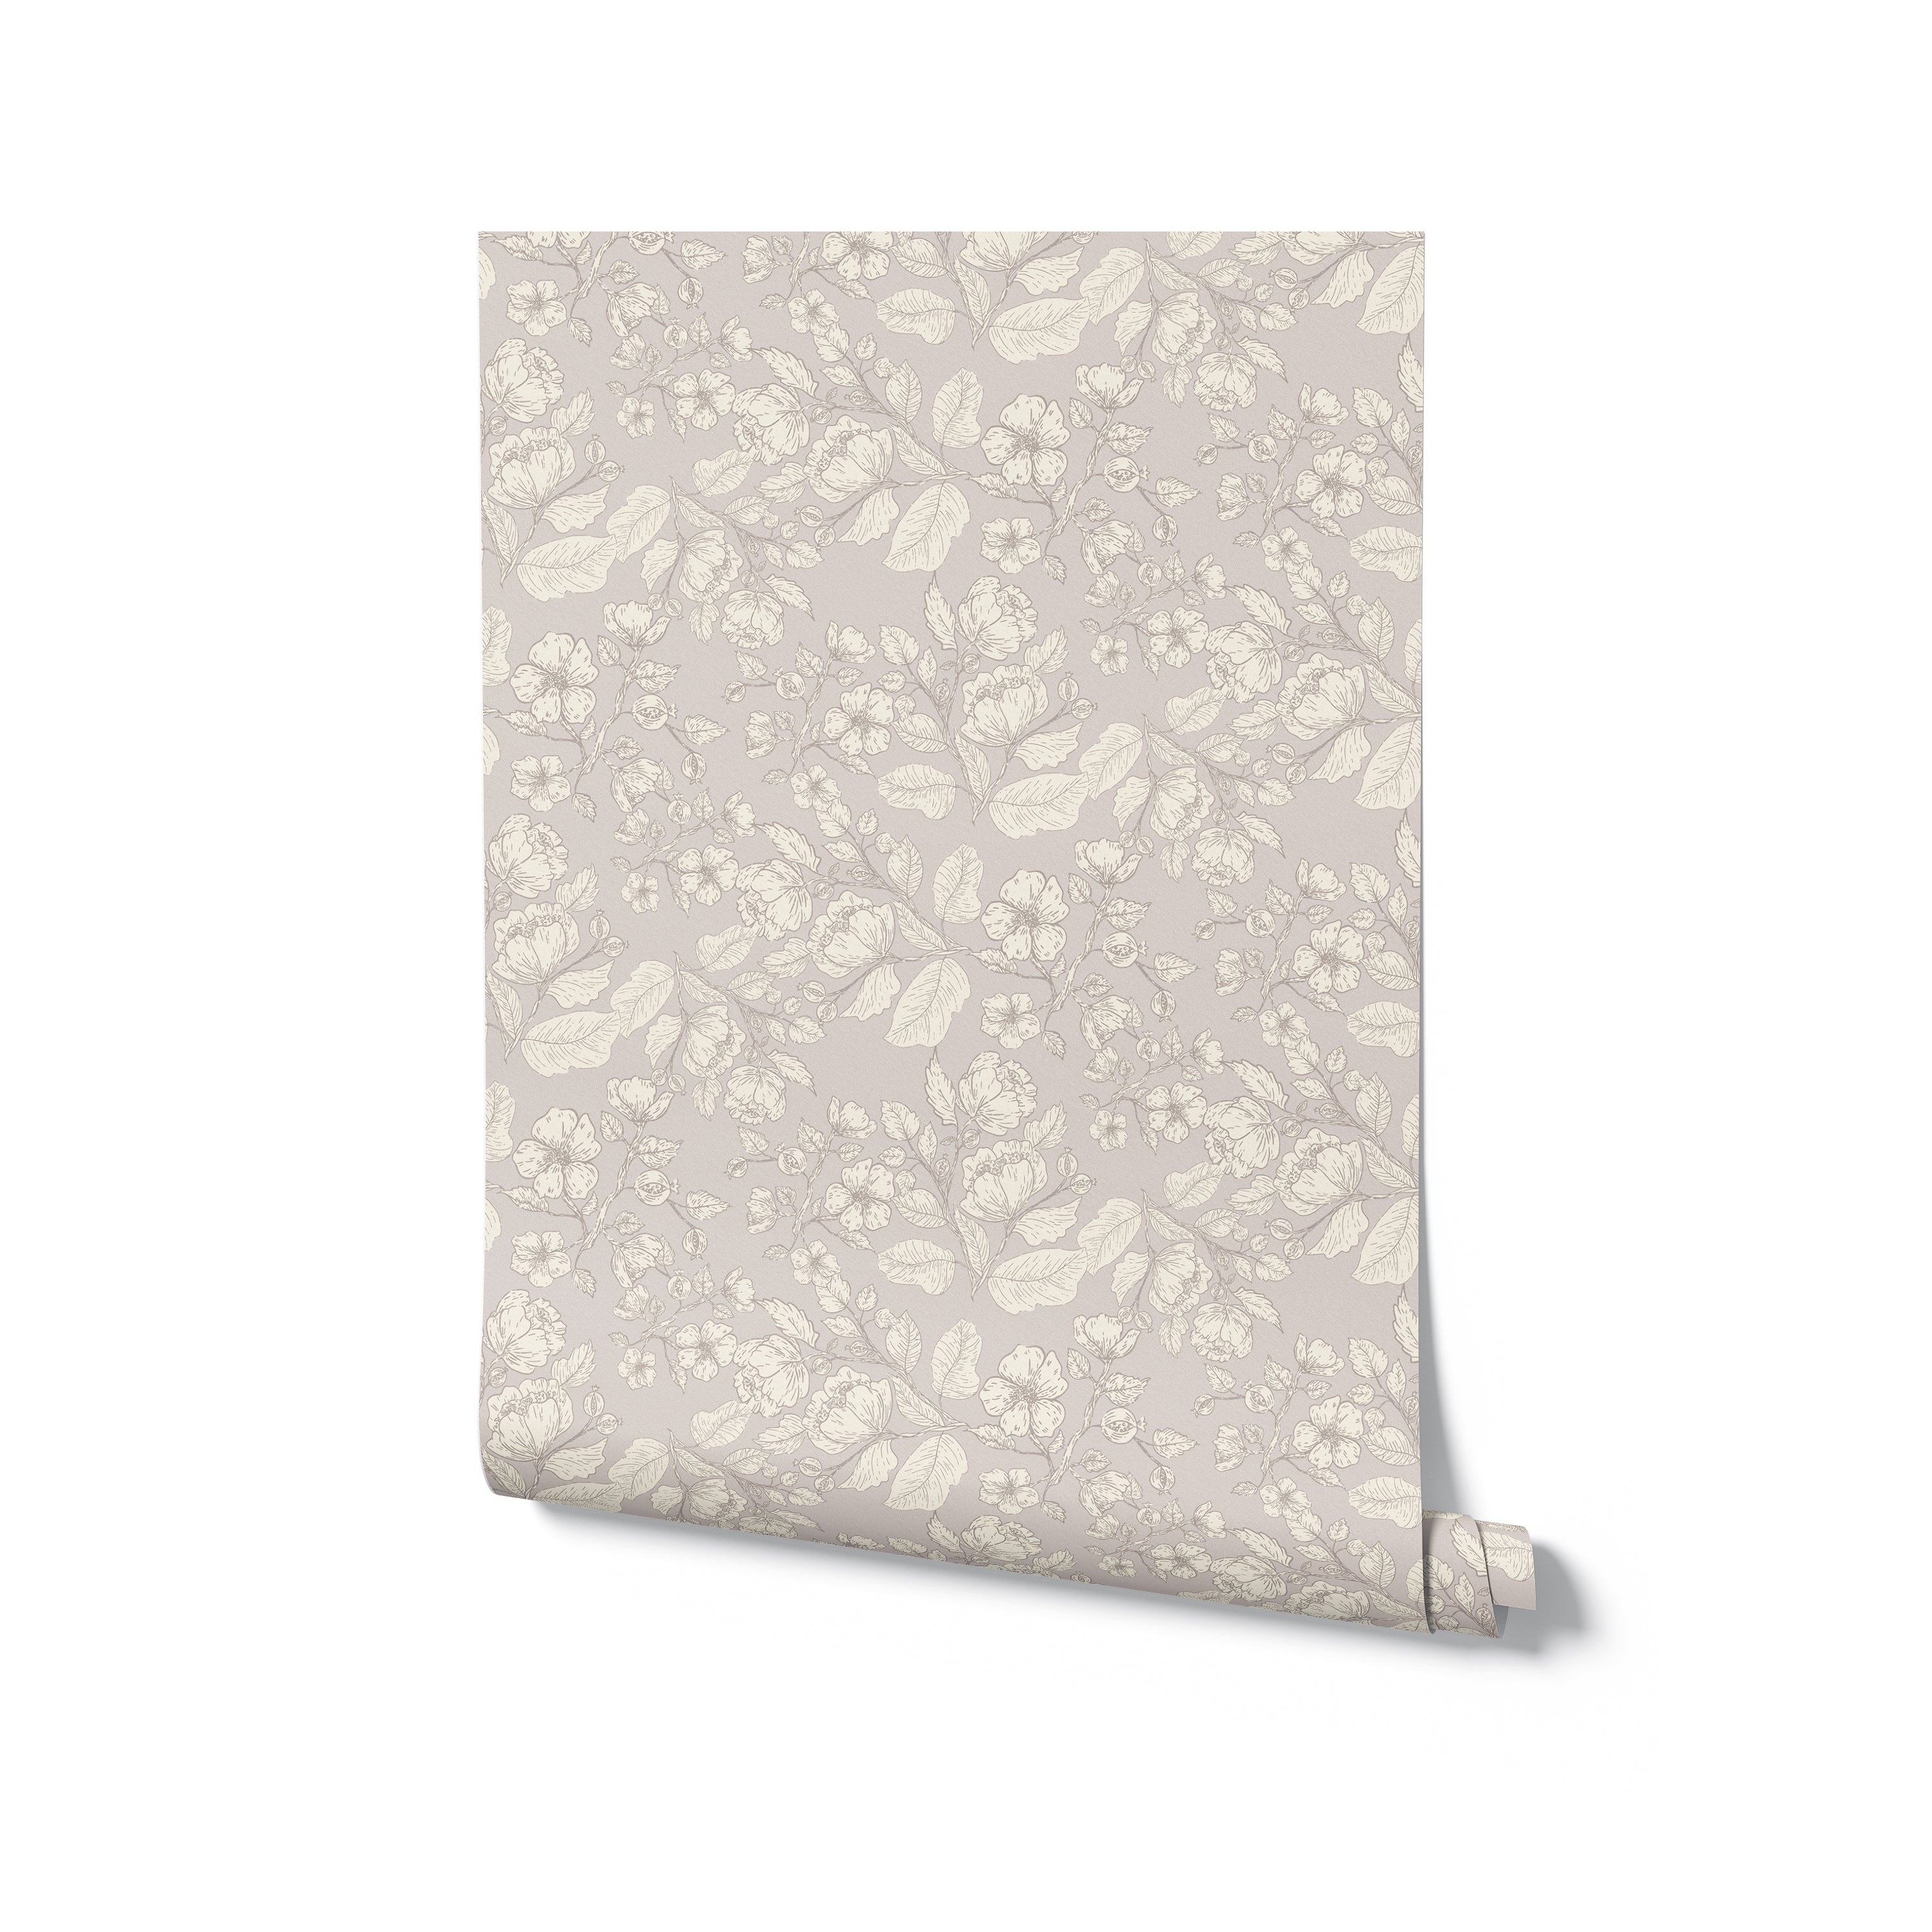 A roll of Château Wallpaper displaying its intricate floral pattern in soft taupe. The wallpaper is neatly rolled, highlighting the detailed and refined design, perfect for adding a touch of elegance to any room.